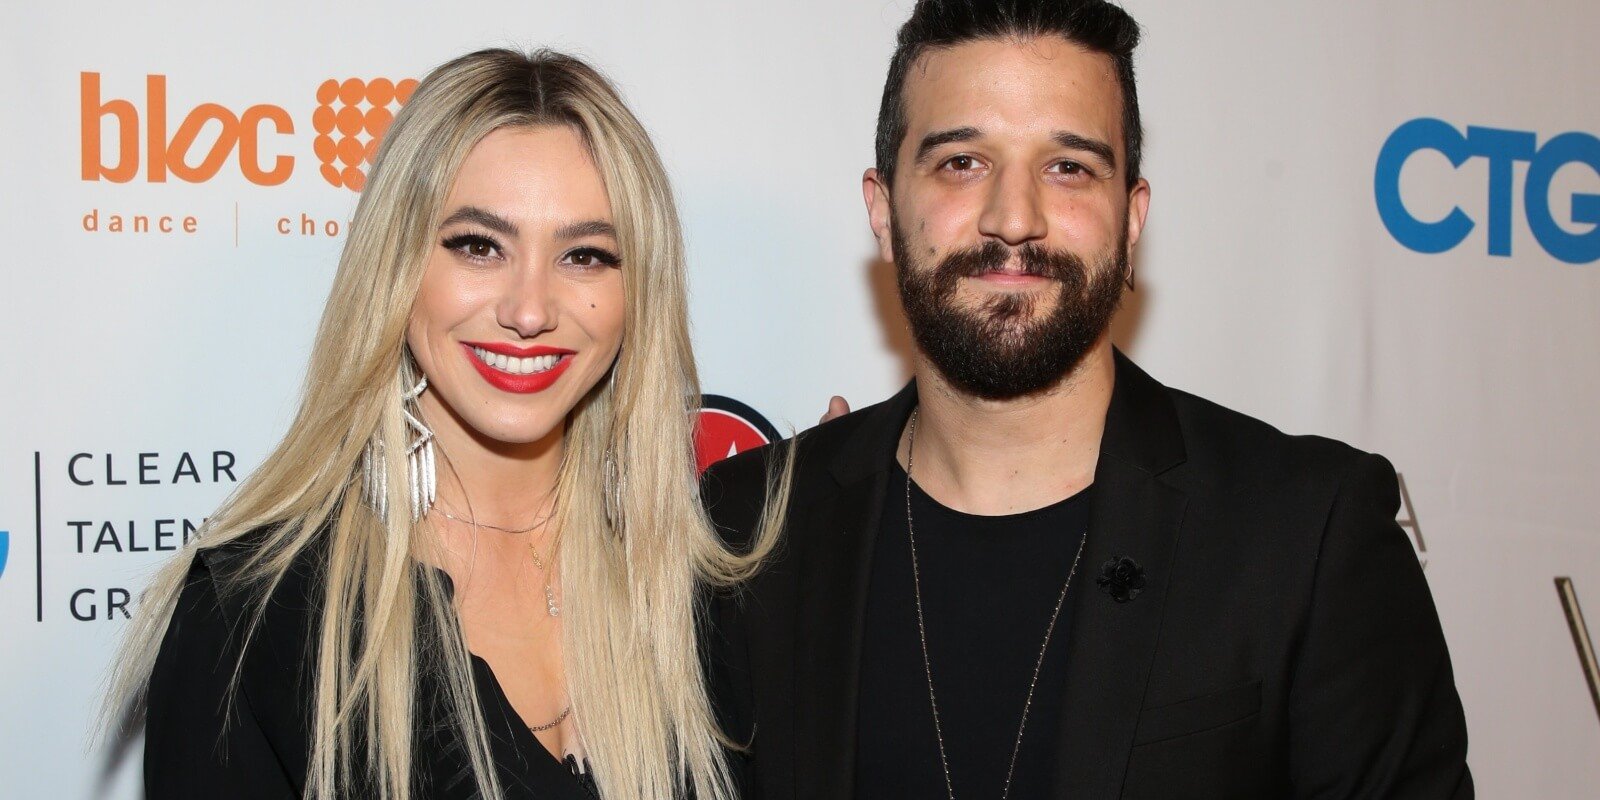 BC Jean and Mark Ballas shared news they were expecting their first child together via an Instagram reel.